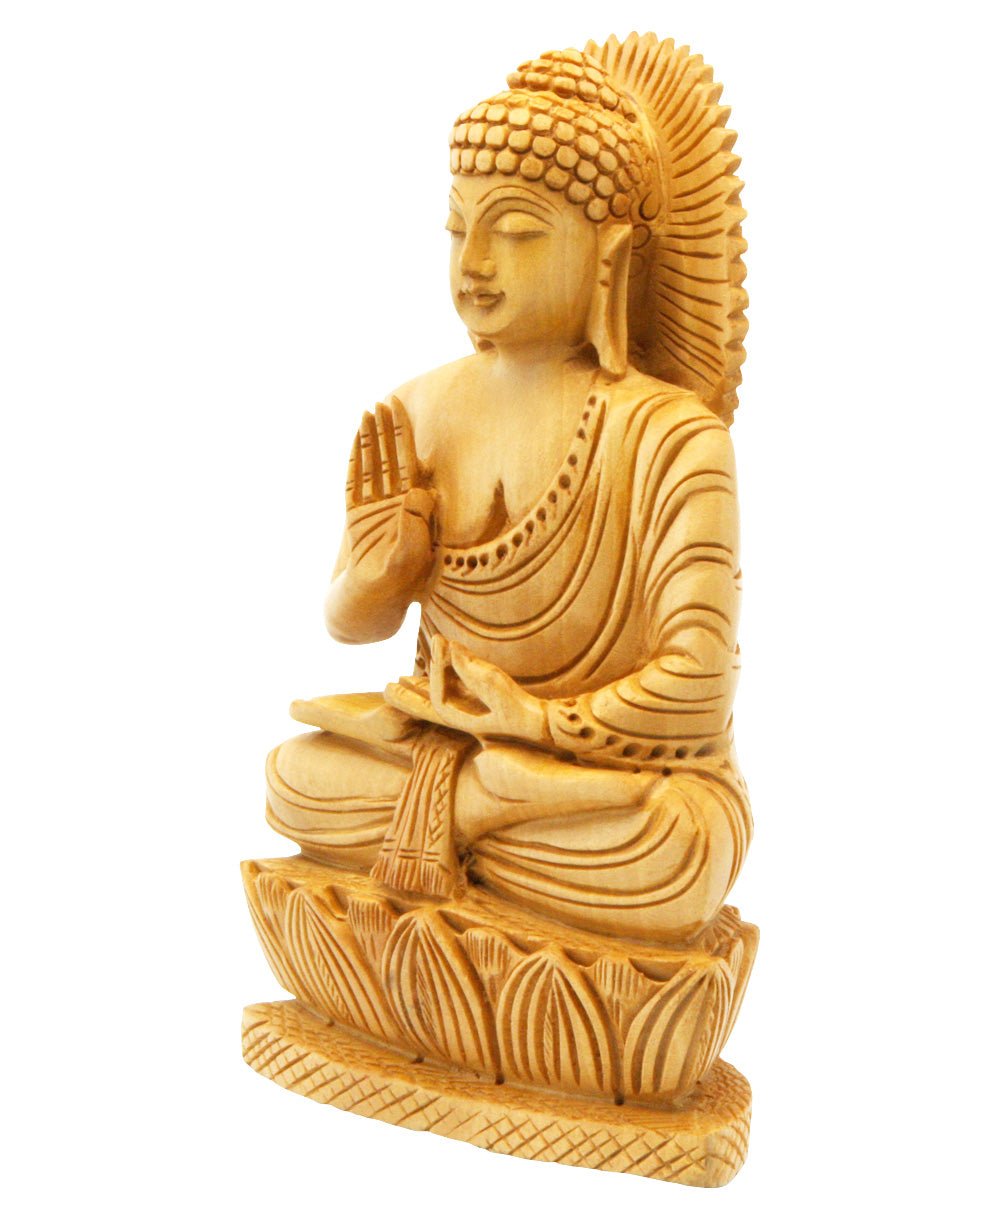 Hand Carved Wood Sitting Buddha Statue - Sculptures & Statues